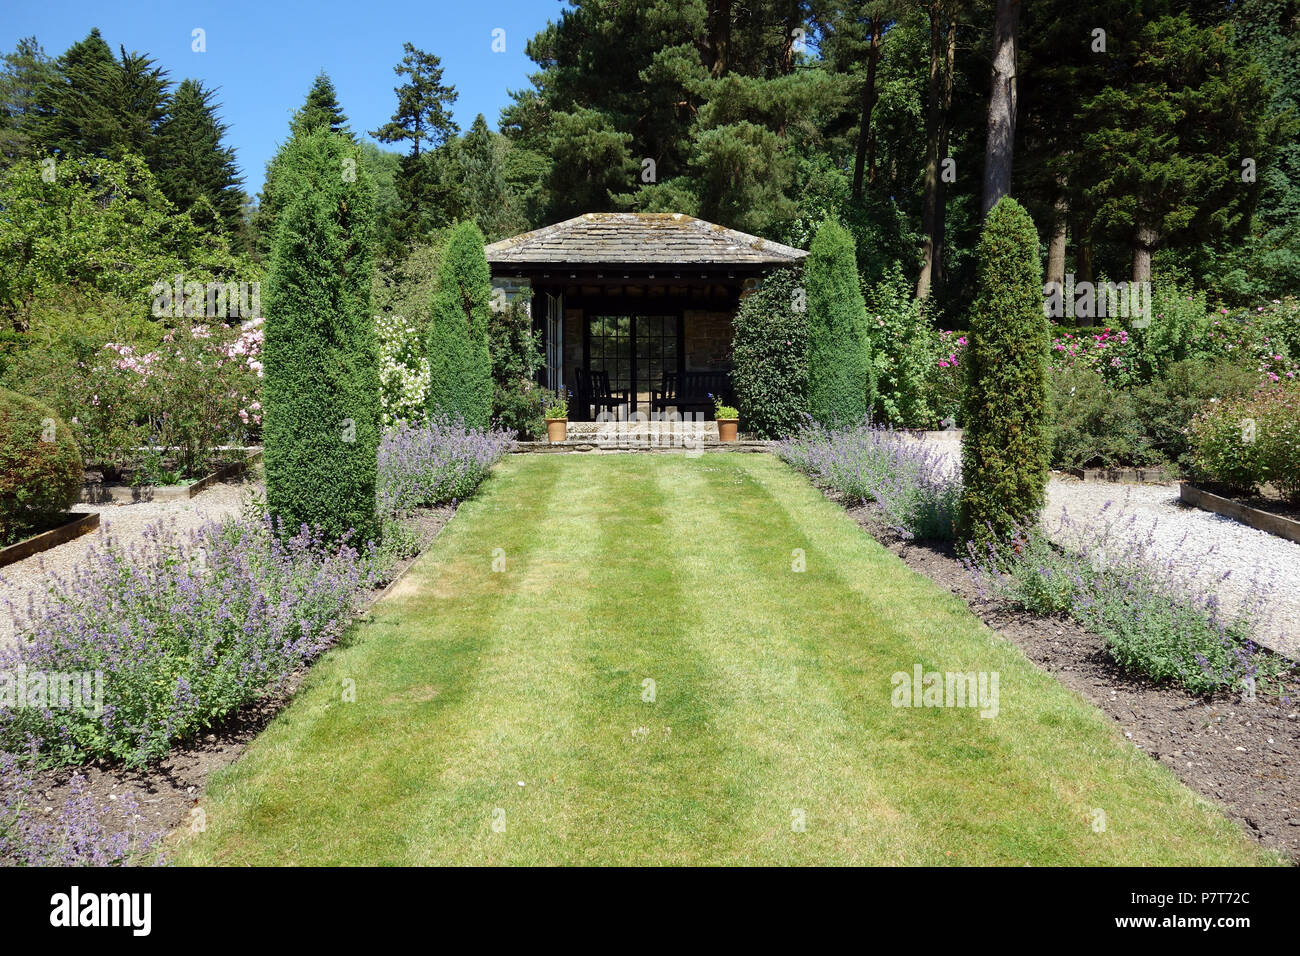 The Lawn & Summerhouse in the Rose Garden at Parcevall Hall Gardens, Skyreholme, Appletreewick,Wharfedale, Yorkshire, England,UK. Stock Photo